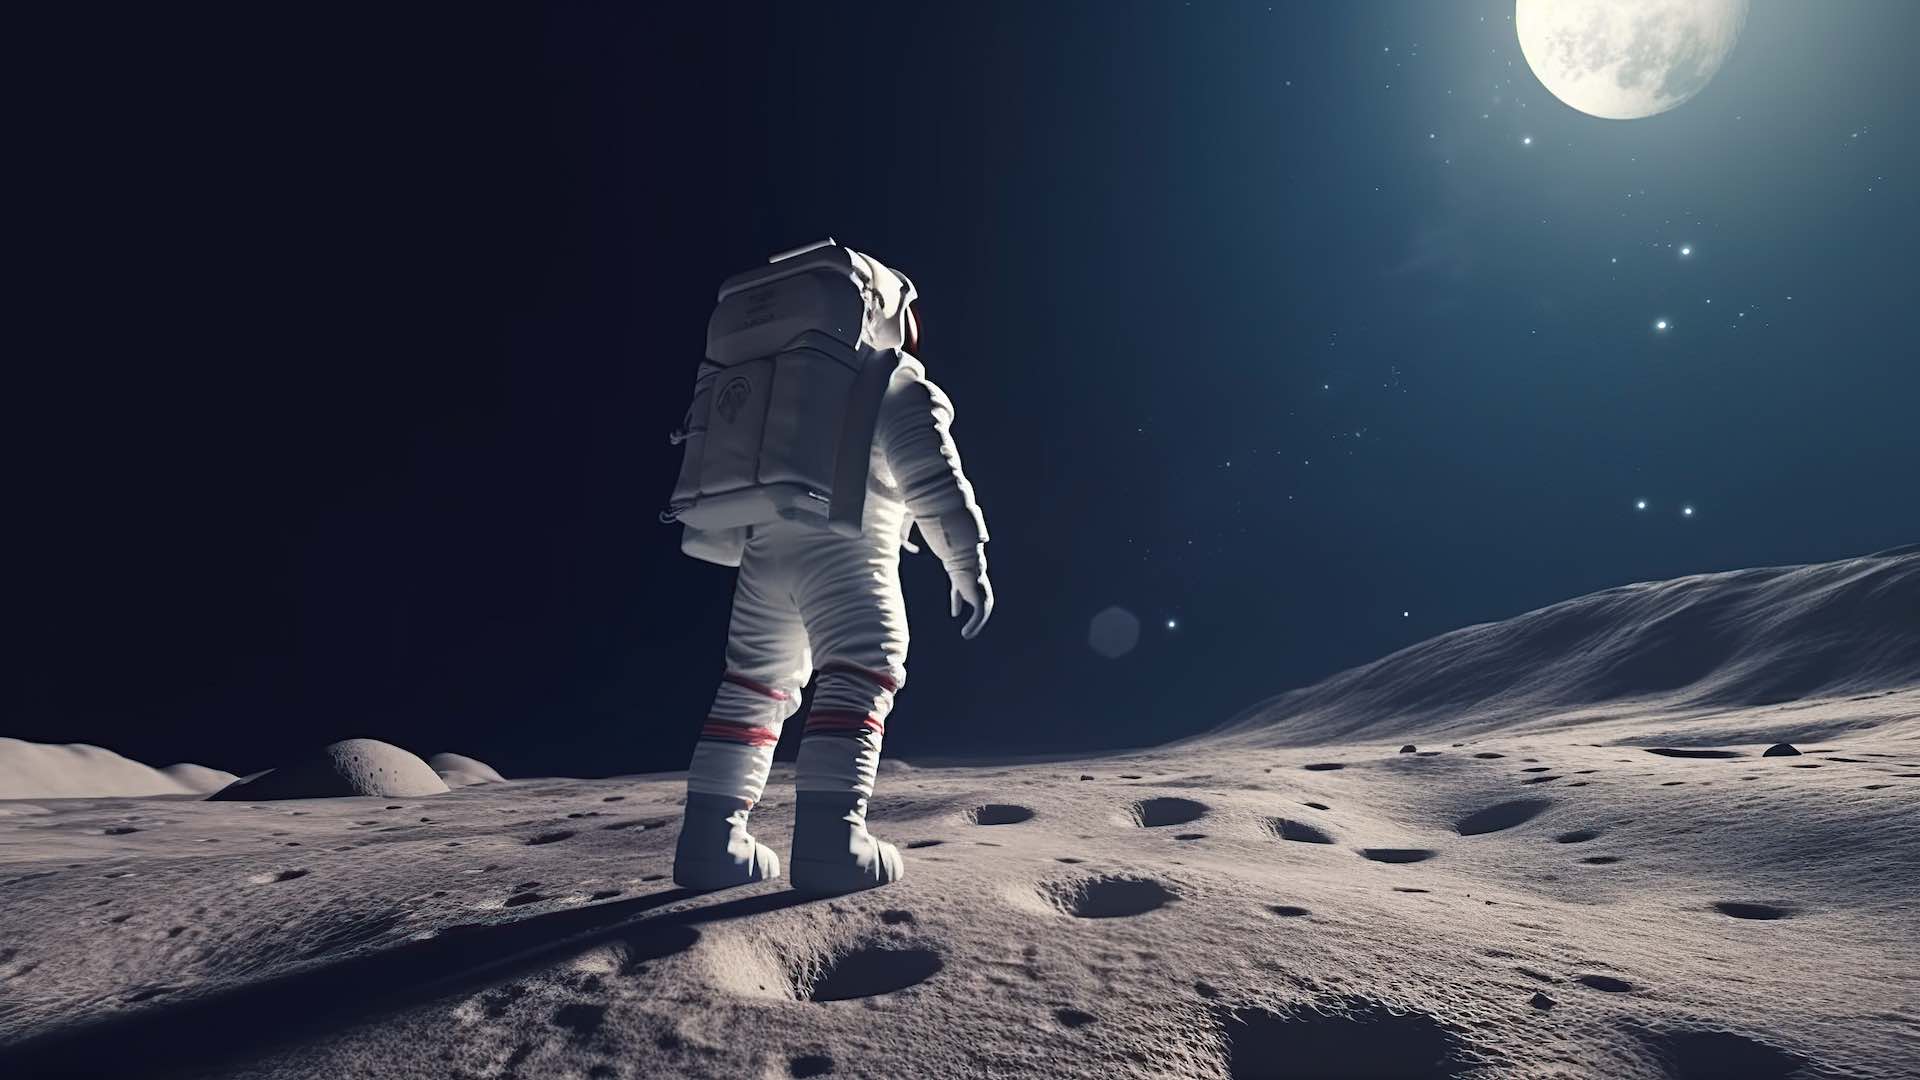 Space travel's hidden risks include erectile dysfunction and frost damage challenges